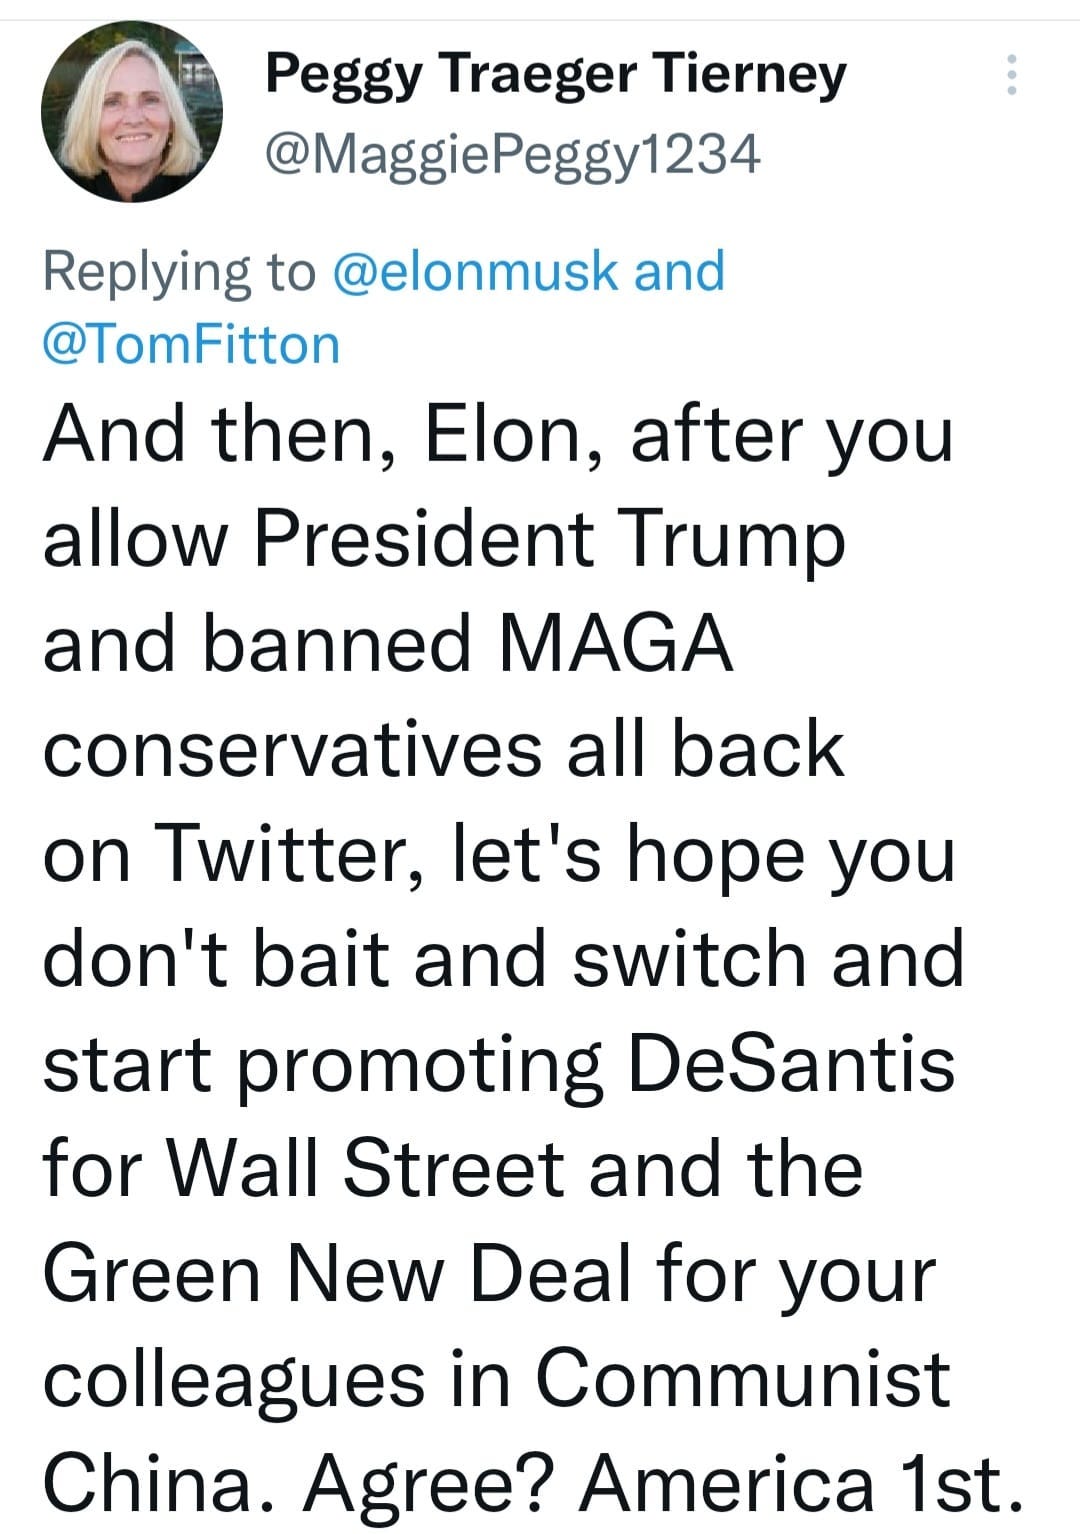 May be a Twitter screenshot of 1 person and text that says 'Peggy Traeger Tierney @MaggiePeggy1234 Replying to @elonmusk and @TomFitton And then, Elon, after you allow President Trump and banned MAGA conservatives all back on Twitter, let's hope you don't bait and switch and start promoting DeSantis for Wall Street and the Green New Deal for your colleagues in Communist China. Agree? America 1st.'